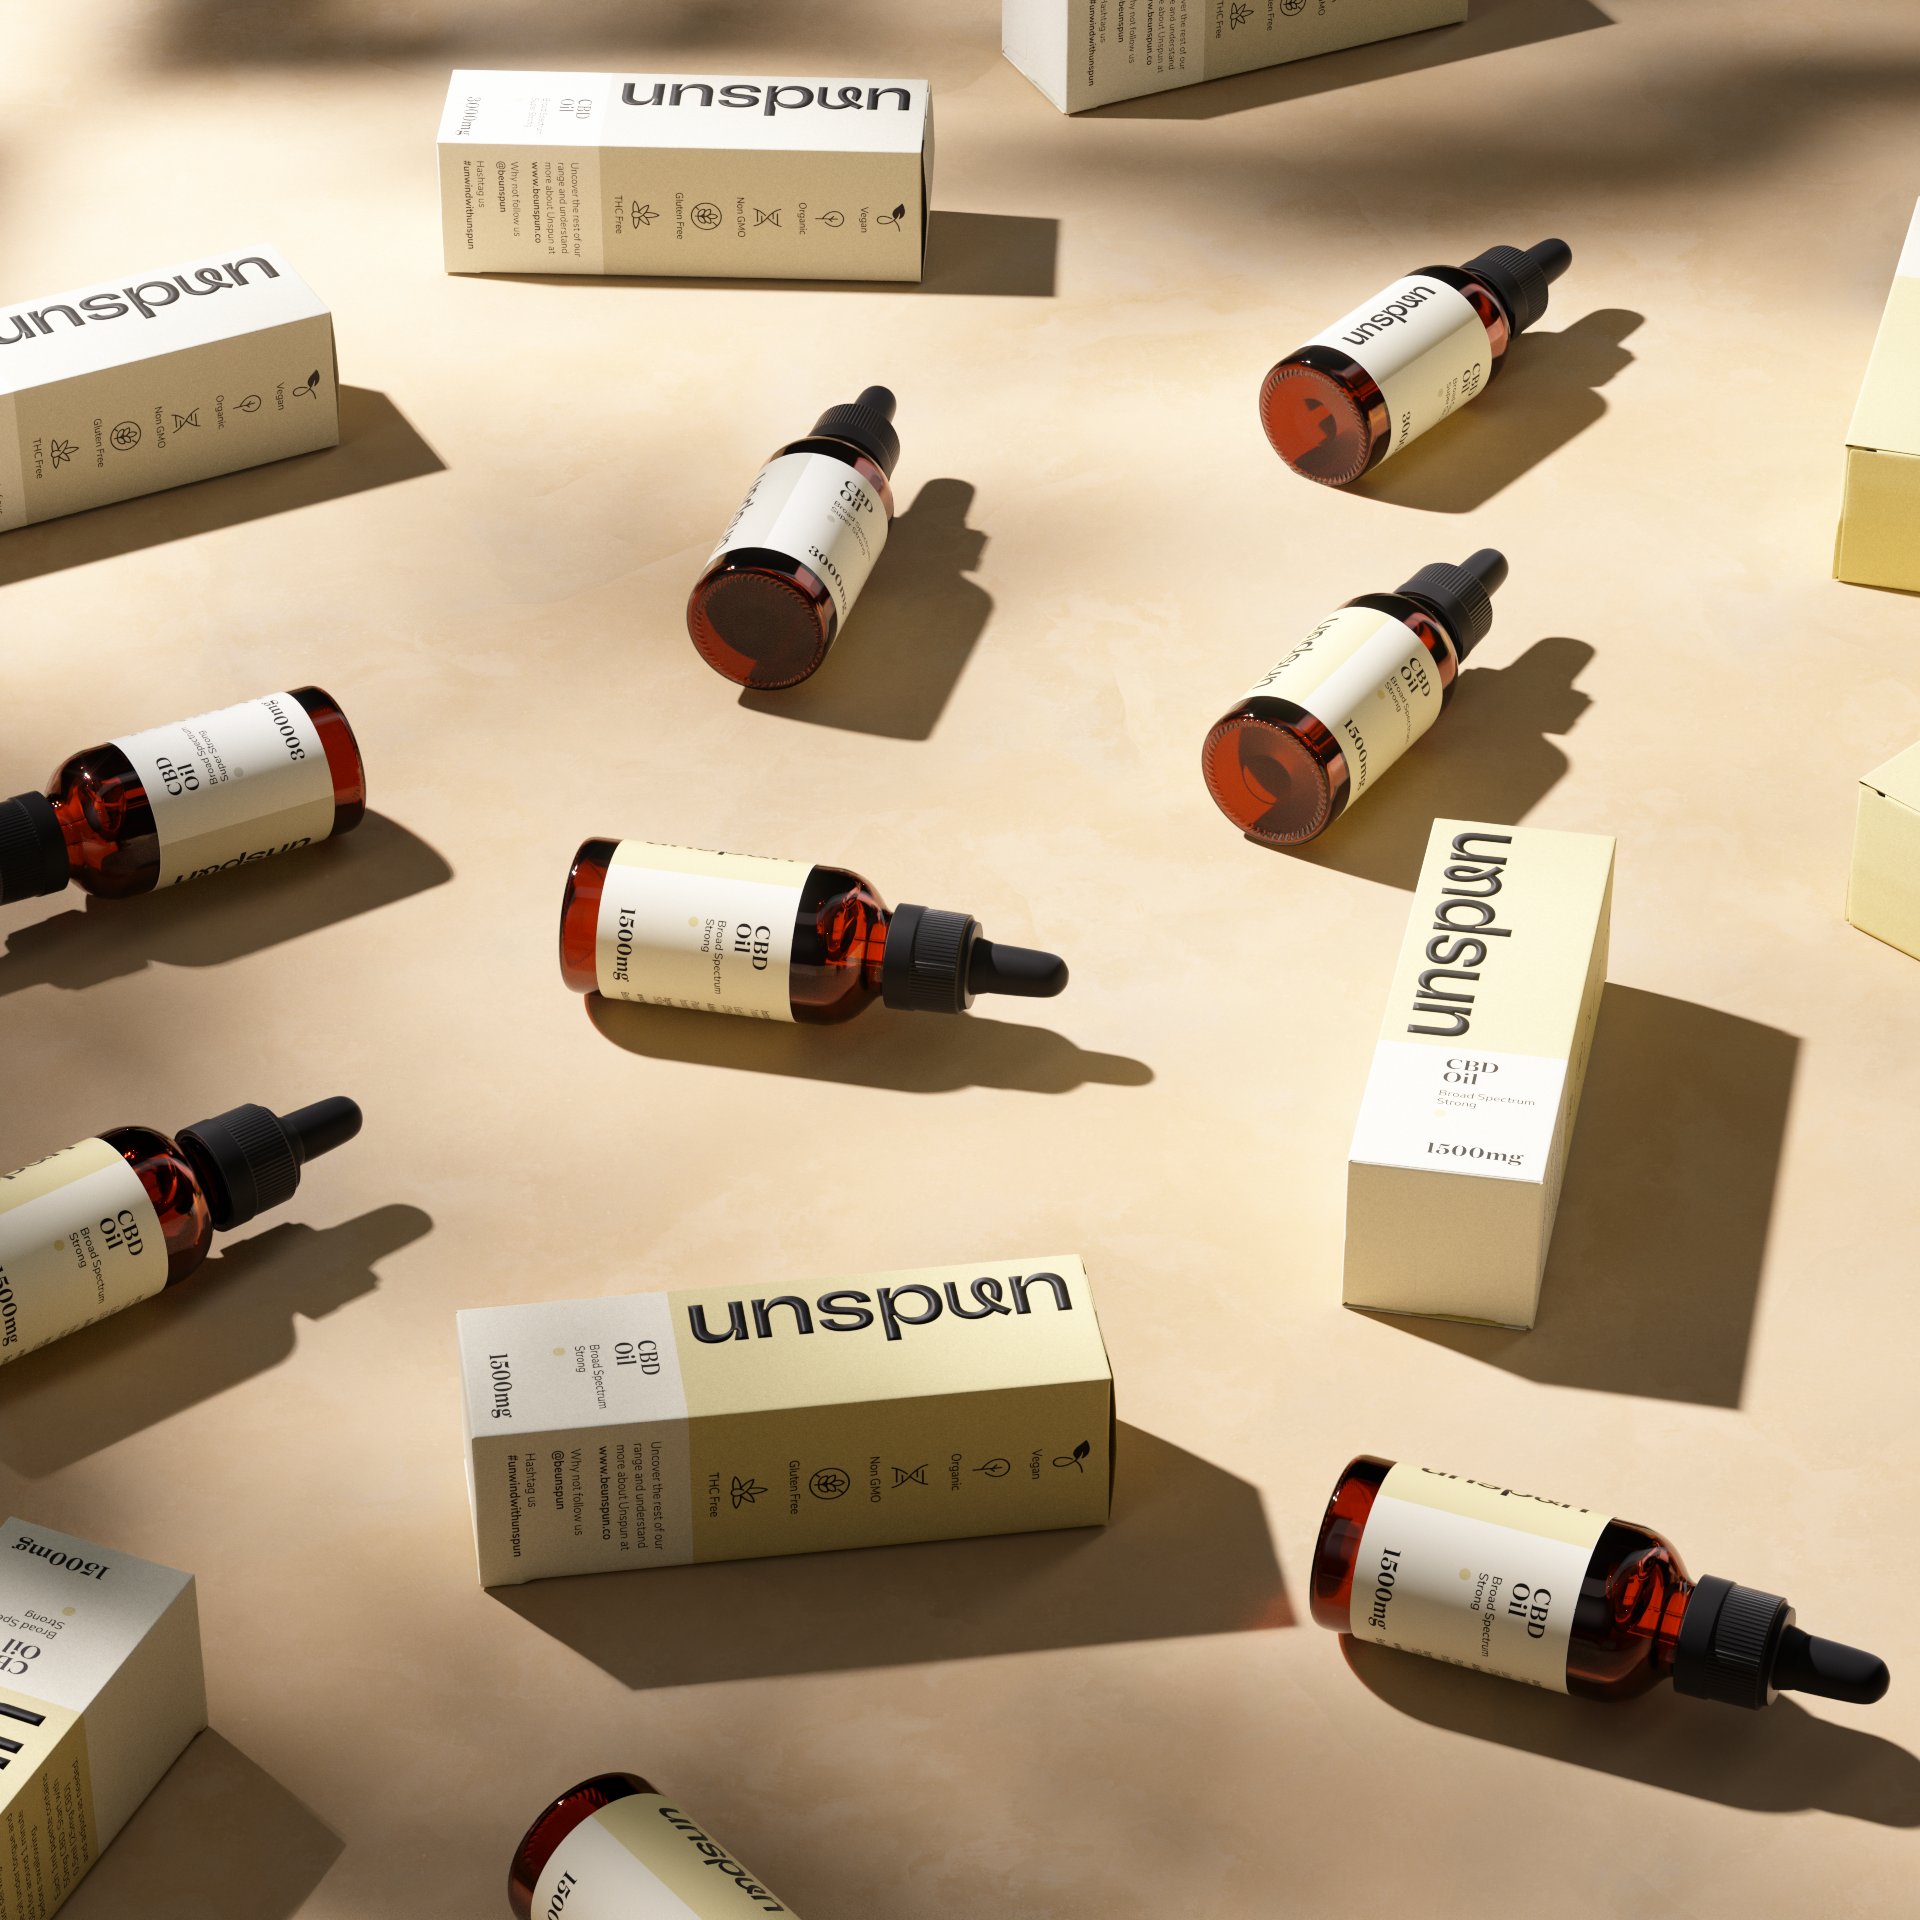  A display of Unspun CBD oil products cast in soft shadows. Multiple amber bottles with droppers labelled with the Unspun logo are interspersed with their corresponding white and beige boxes on a neutral background. The boxes are marked with product information and indicating 1500mg of CBD in a 30ml bottle.